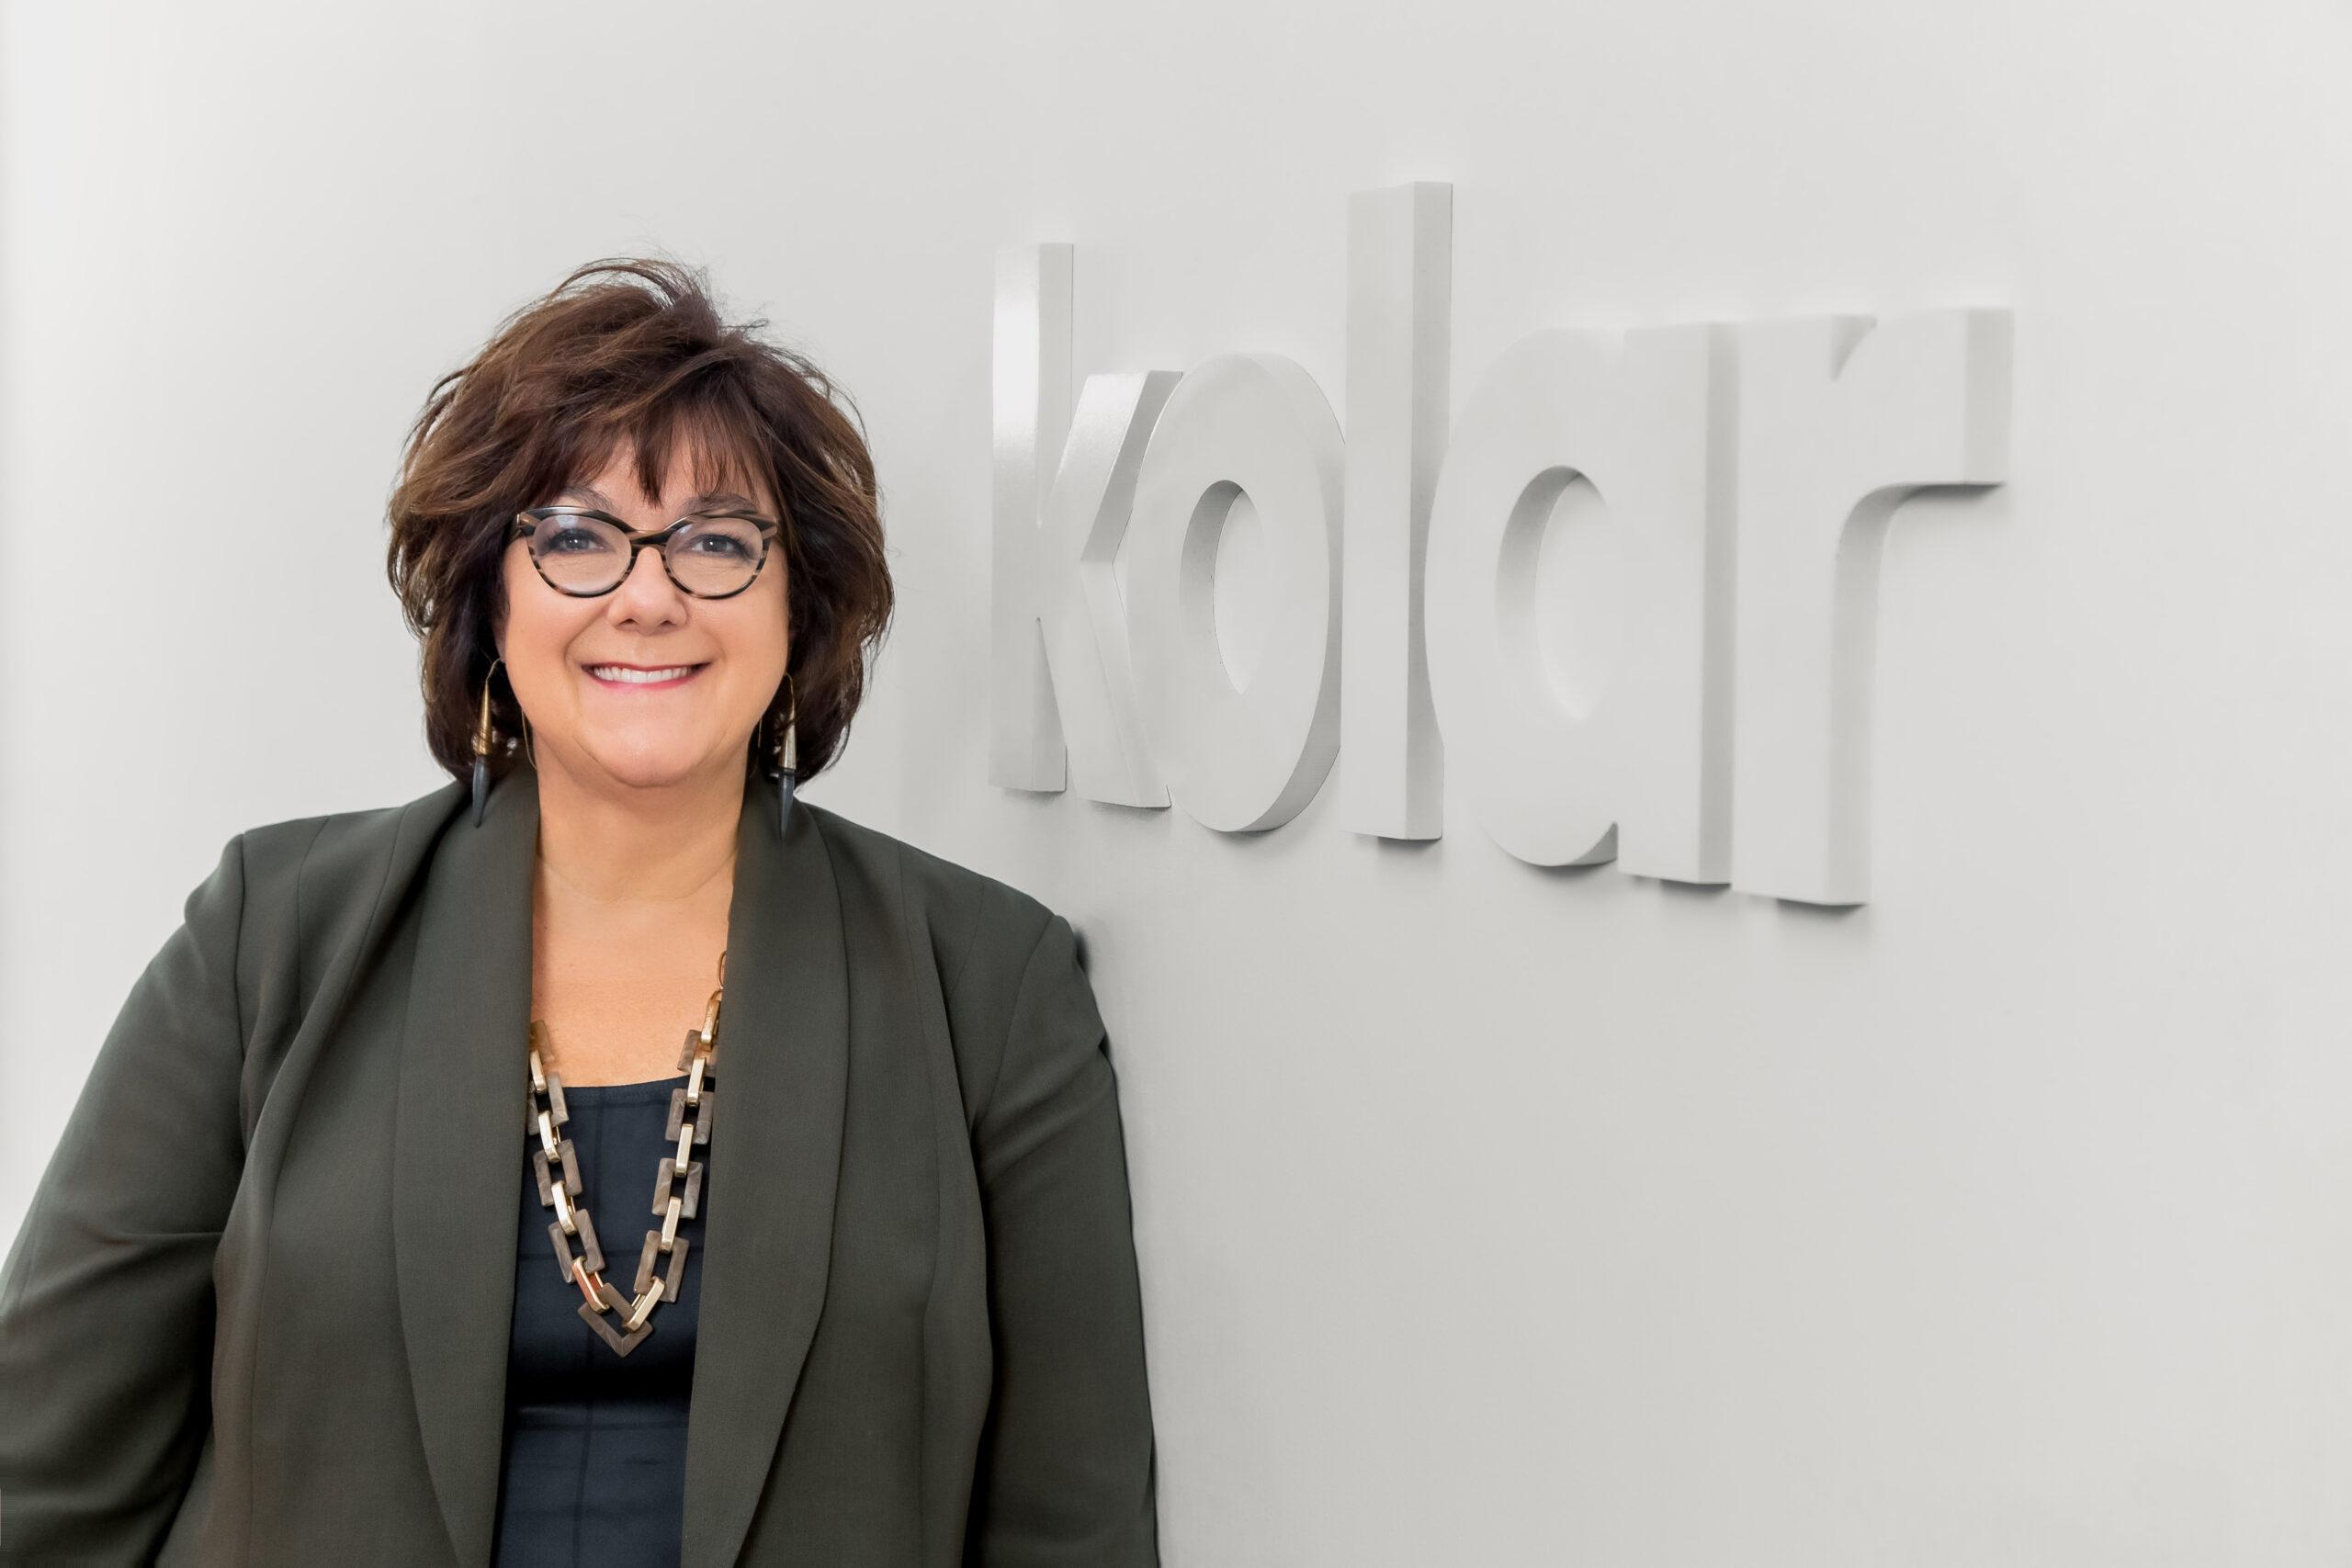 Kolar President and Founder Named Second Vice Chair of Women’s Business Enterprise National Council Forum